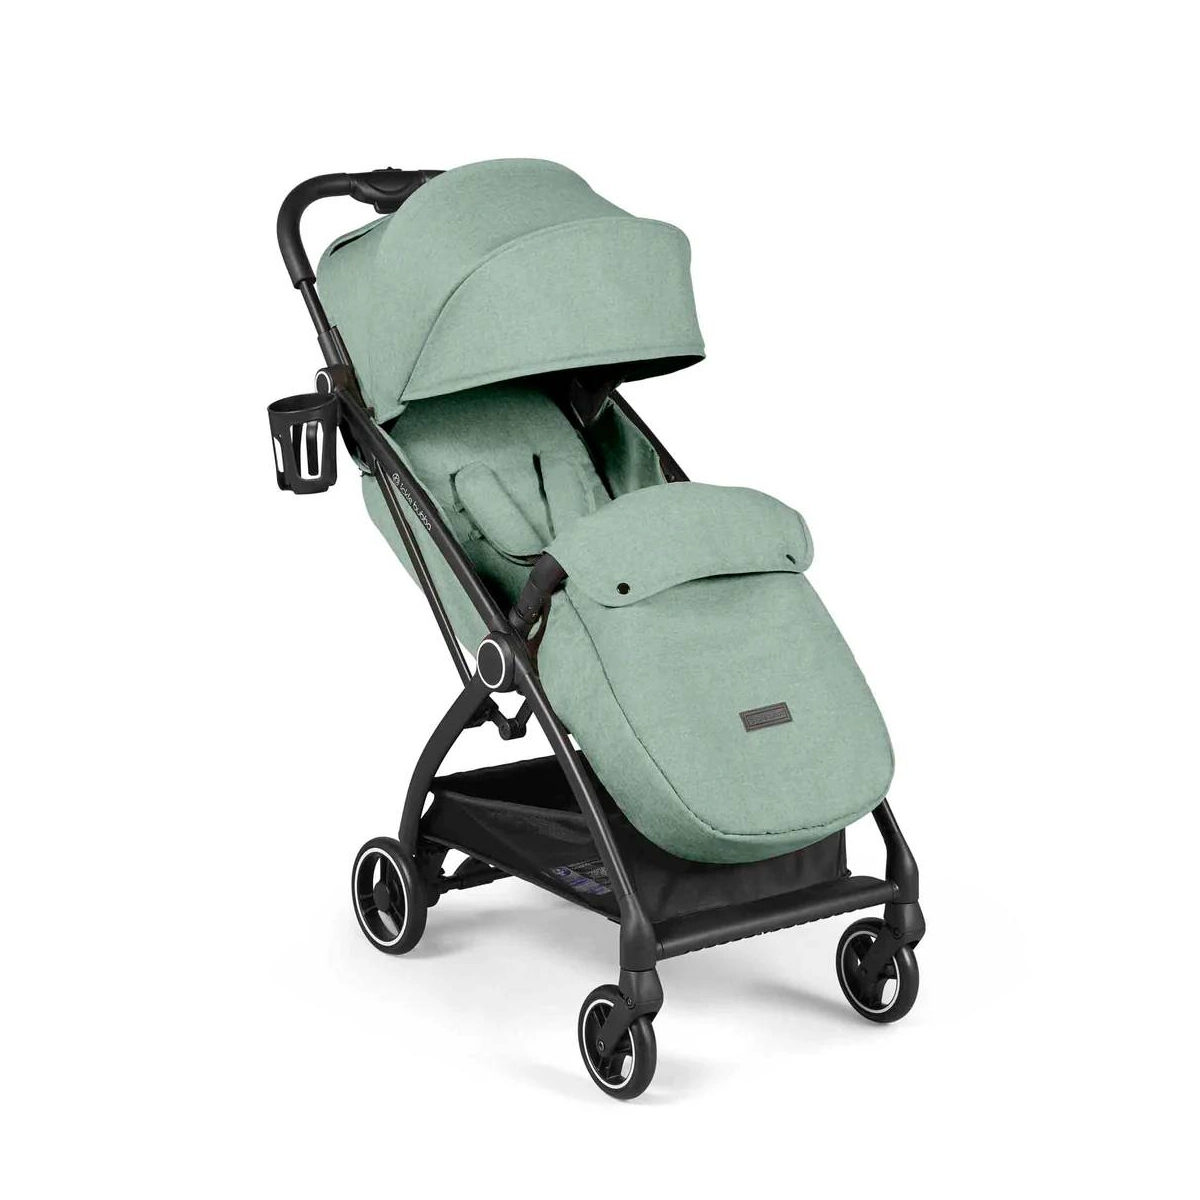 Image of Ickle Bubba Aries Max Autofold Stroller - Sage Green